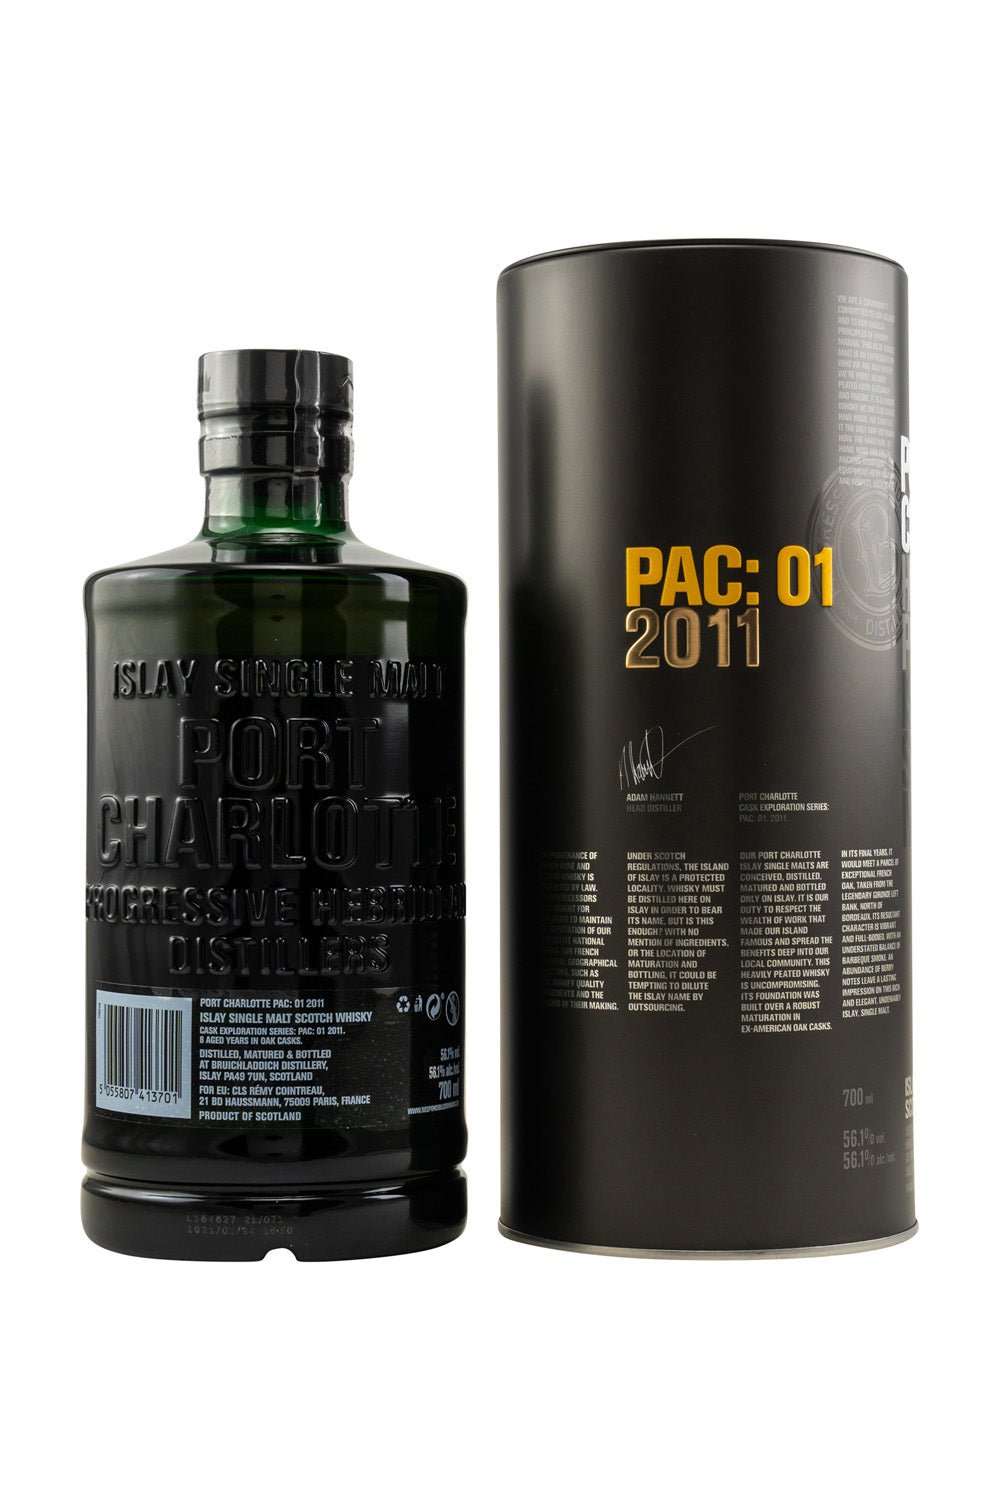 Port Charlotte 2011 PAC:01 Heavily Peated Islay Whisky 56,1% vol. 700ml - Maltimore